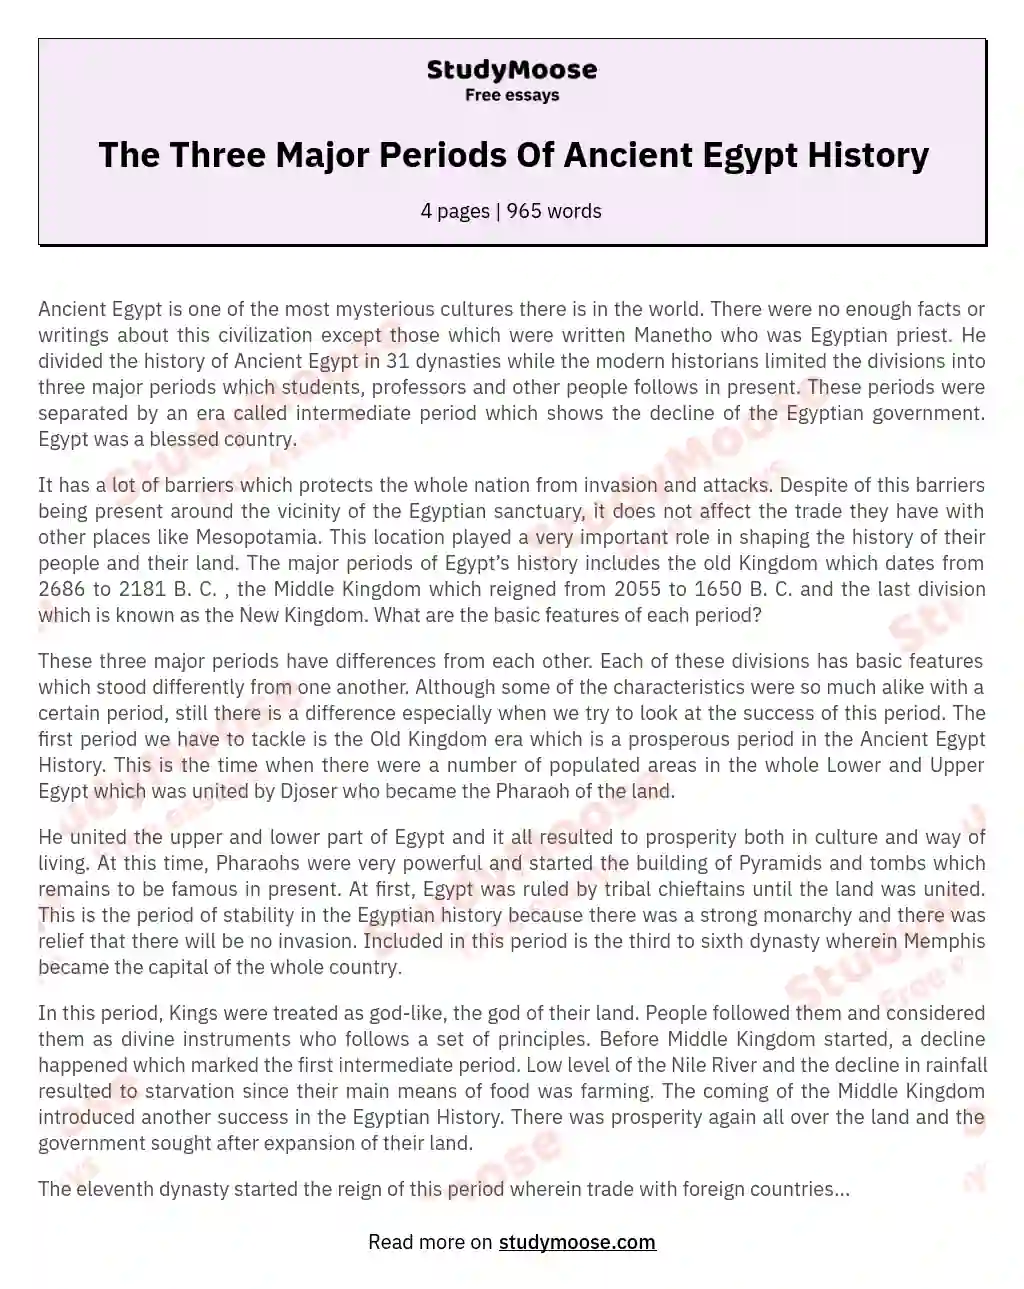 The Three Major Periods Of Ancient Egypt History essay